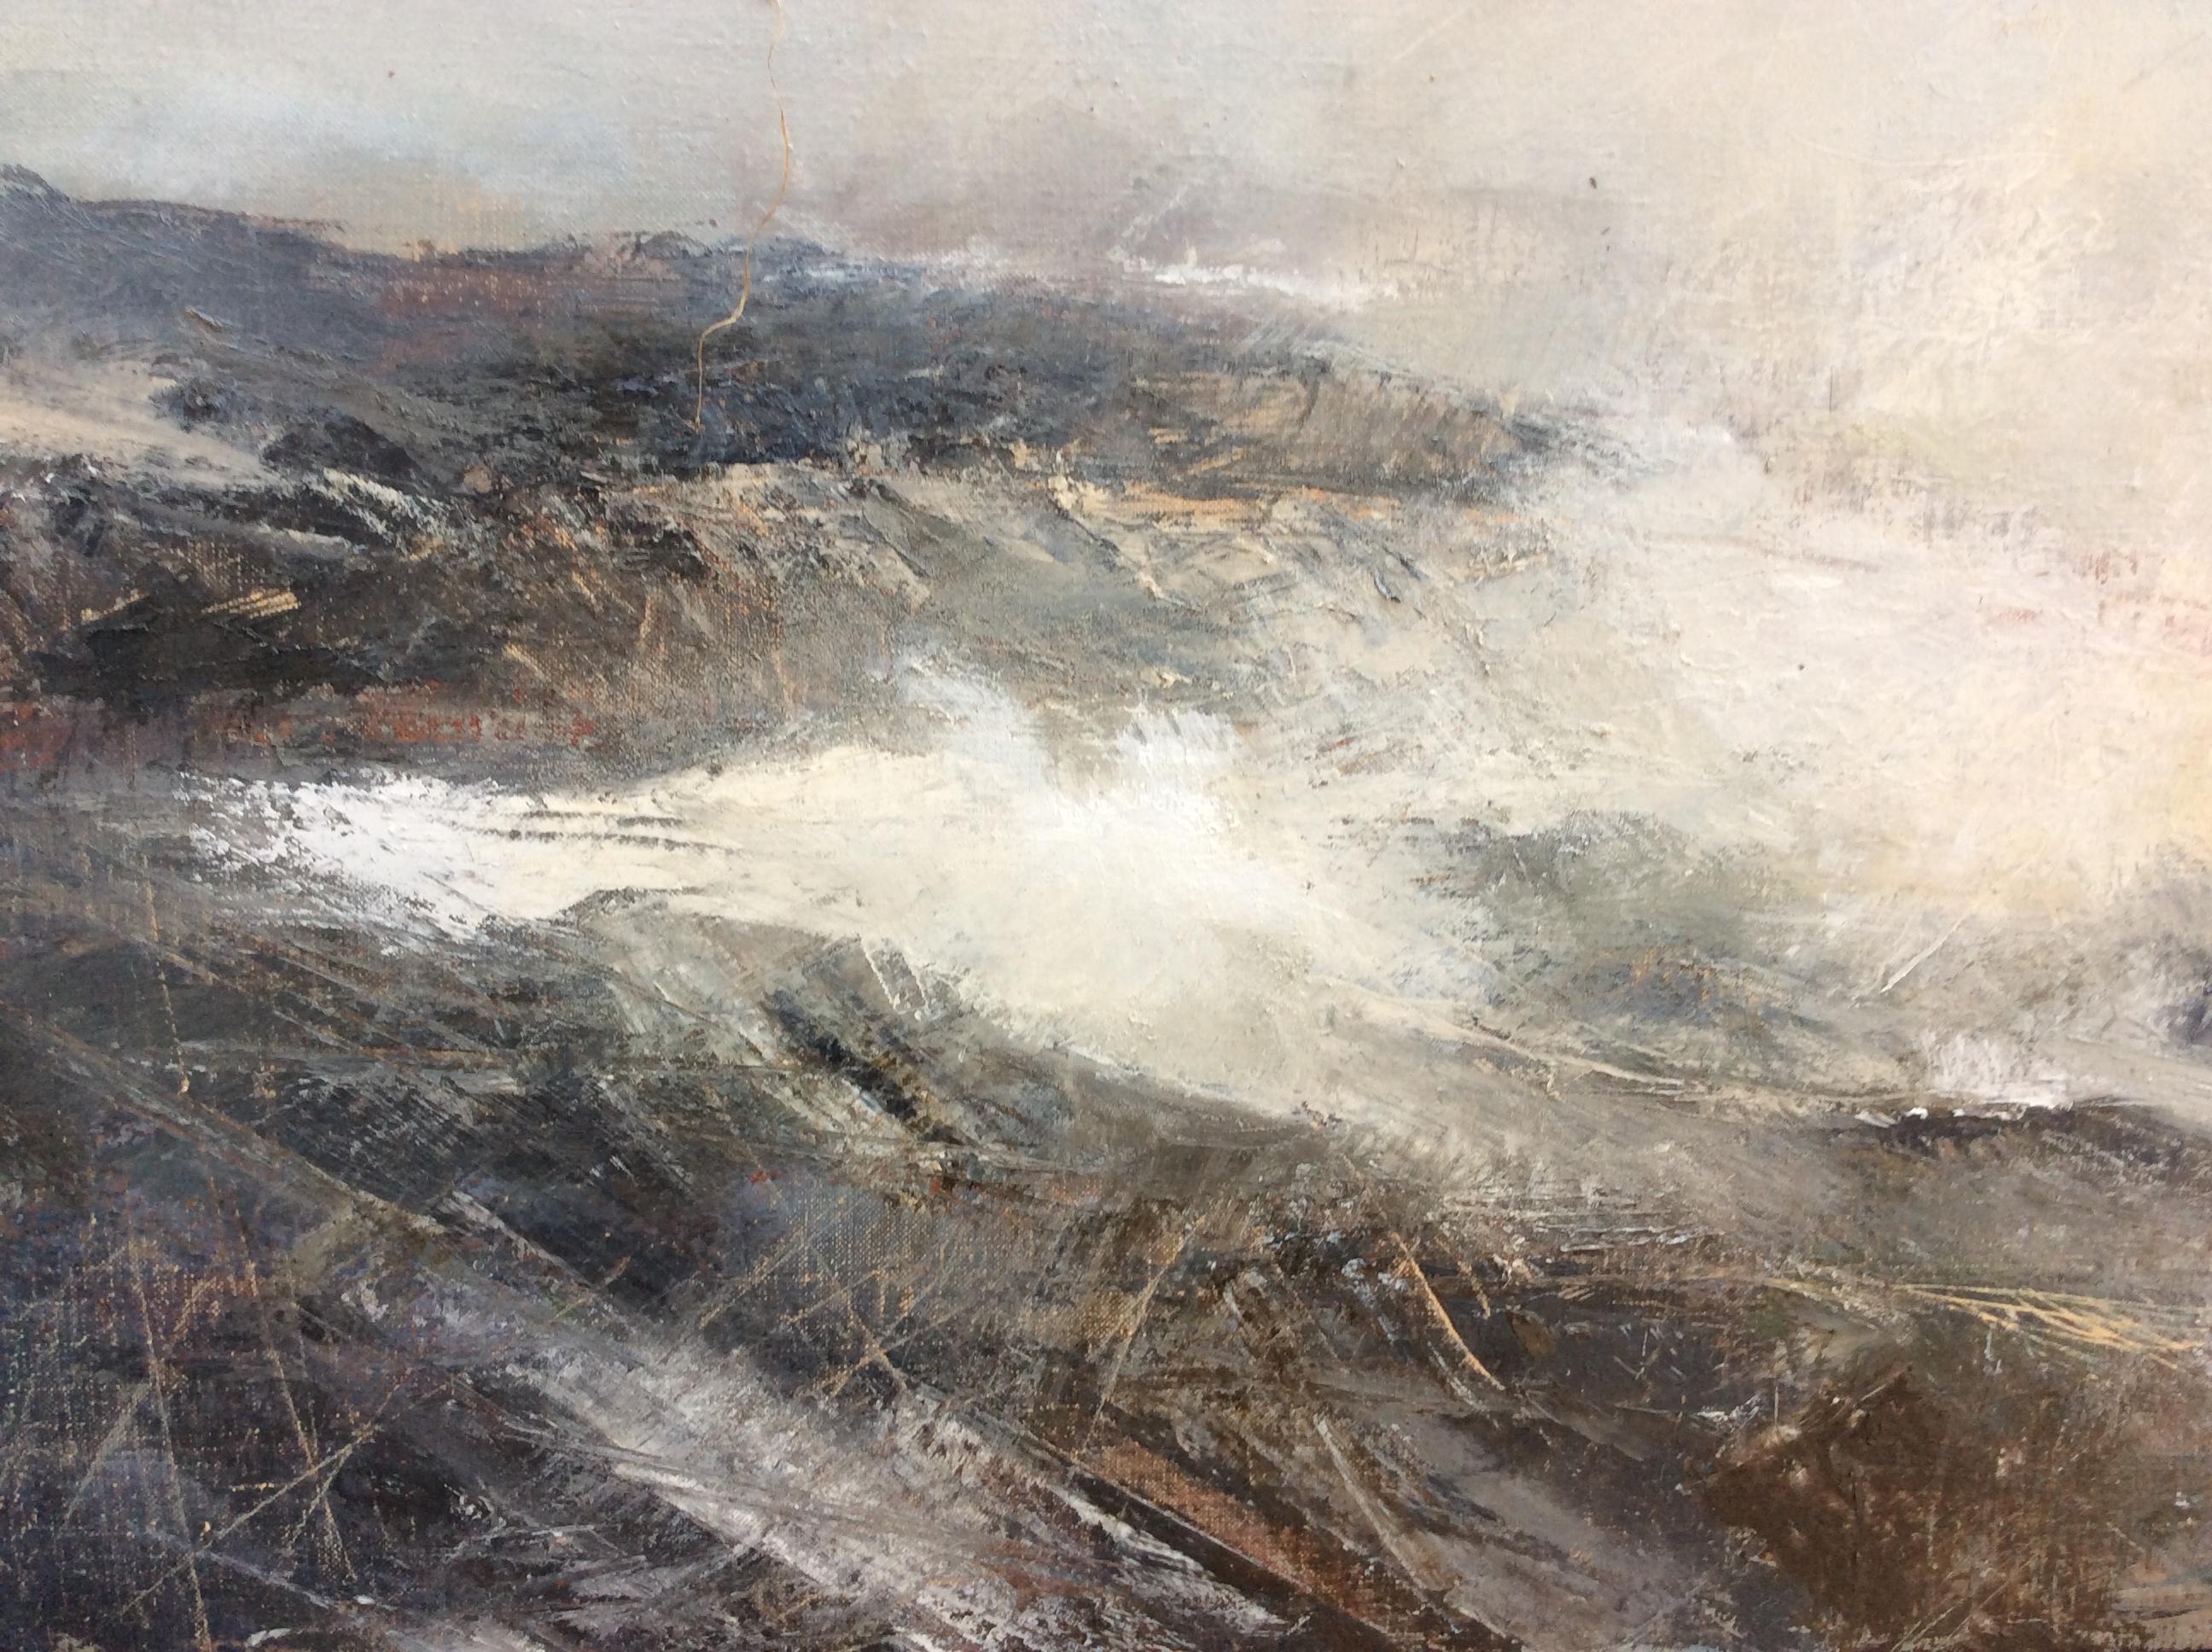 Framed in dark charcoal tray frame.
This original oil painting on canvas, a seascape based on the bleak and often romantic outer reaches of the U.K, was inspired by the sense of place and timelessness offered by remote islands. Underlying the the